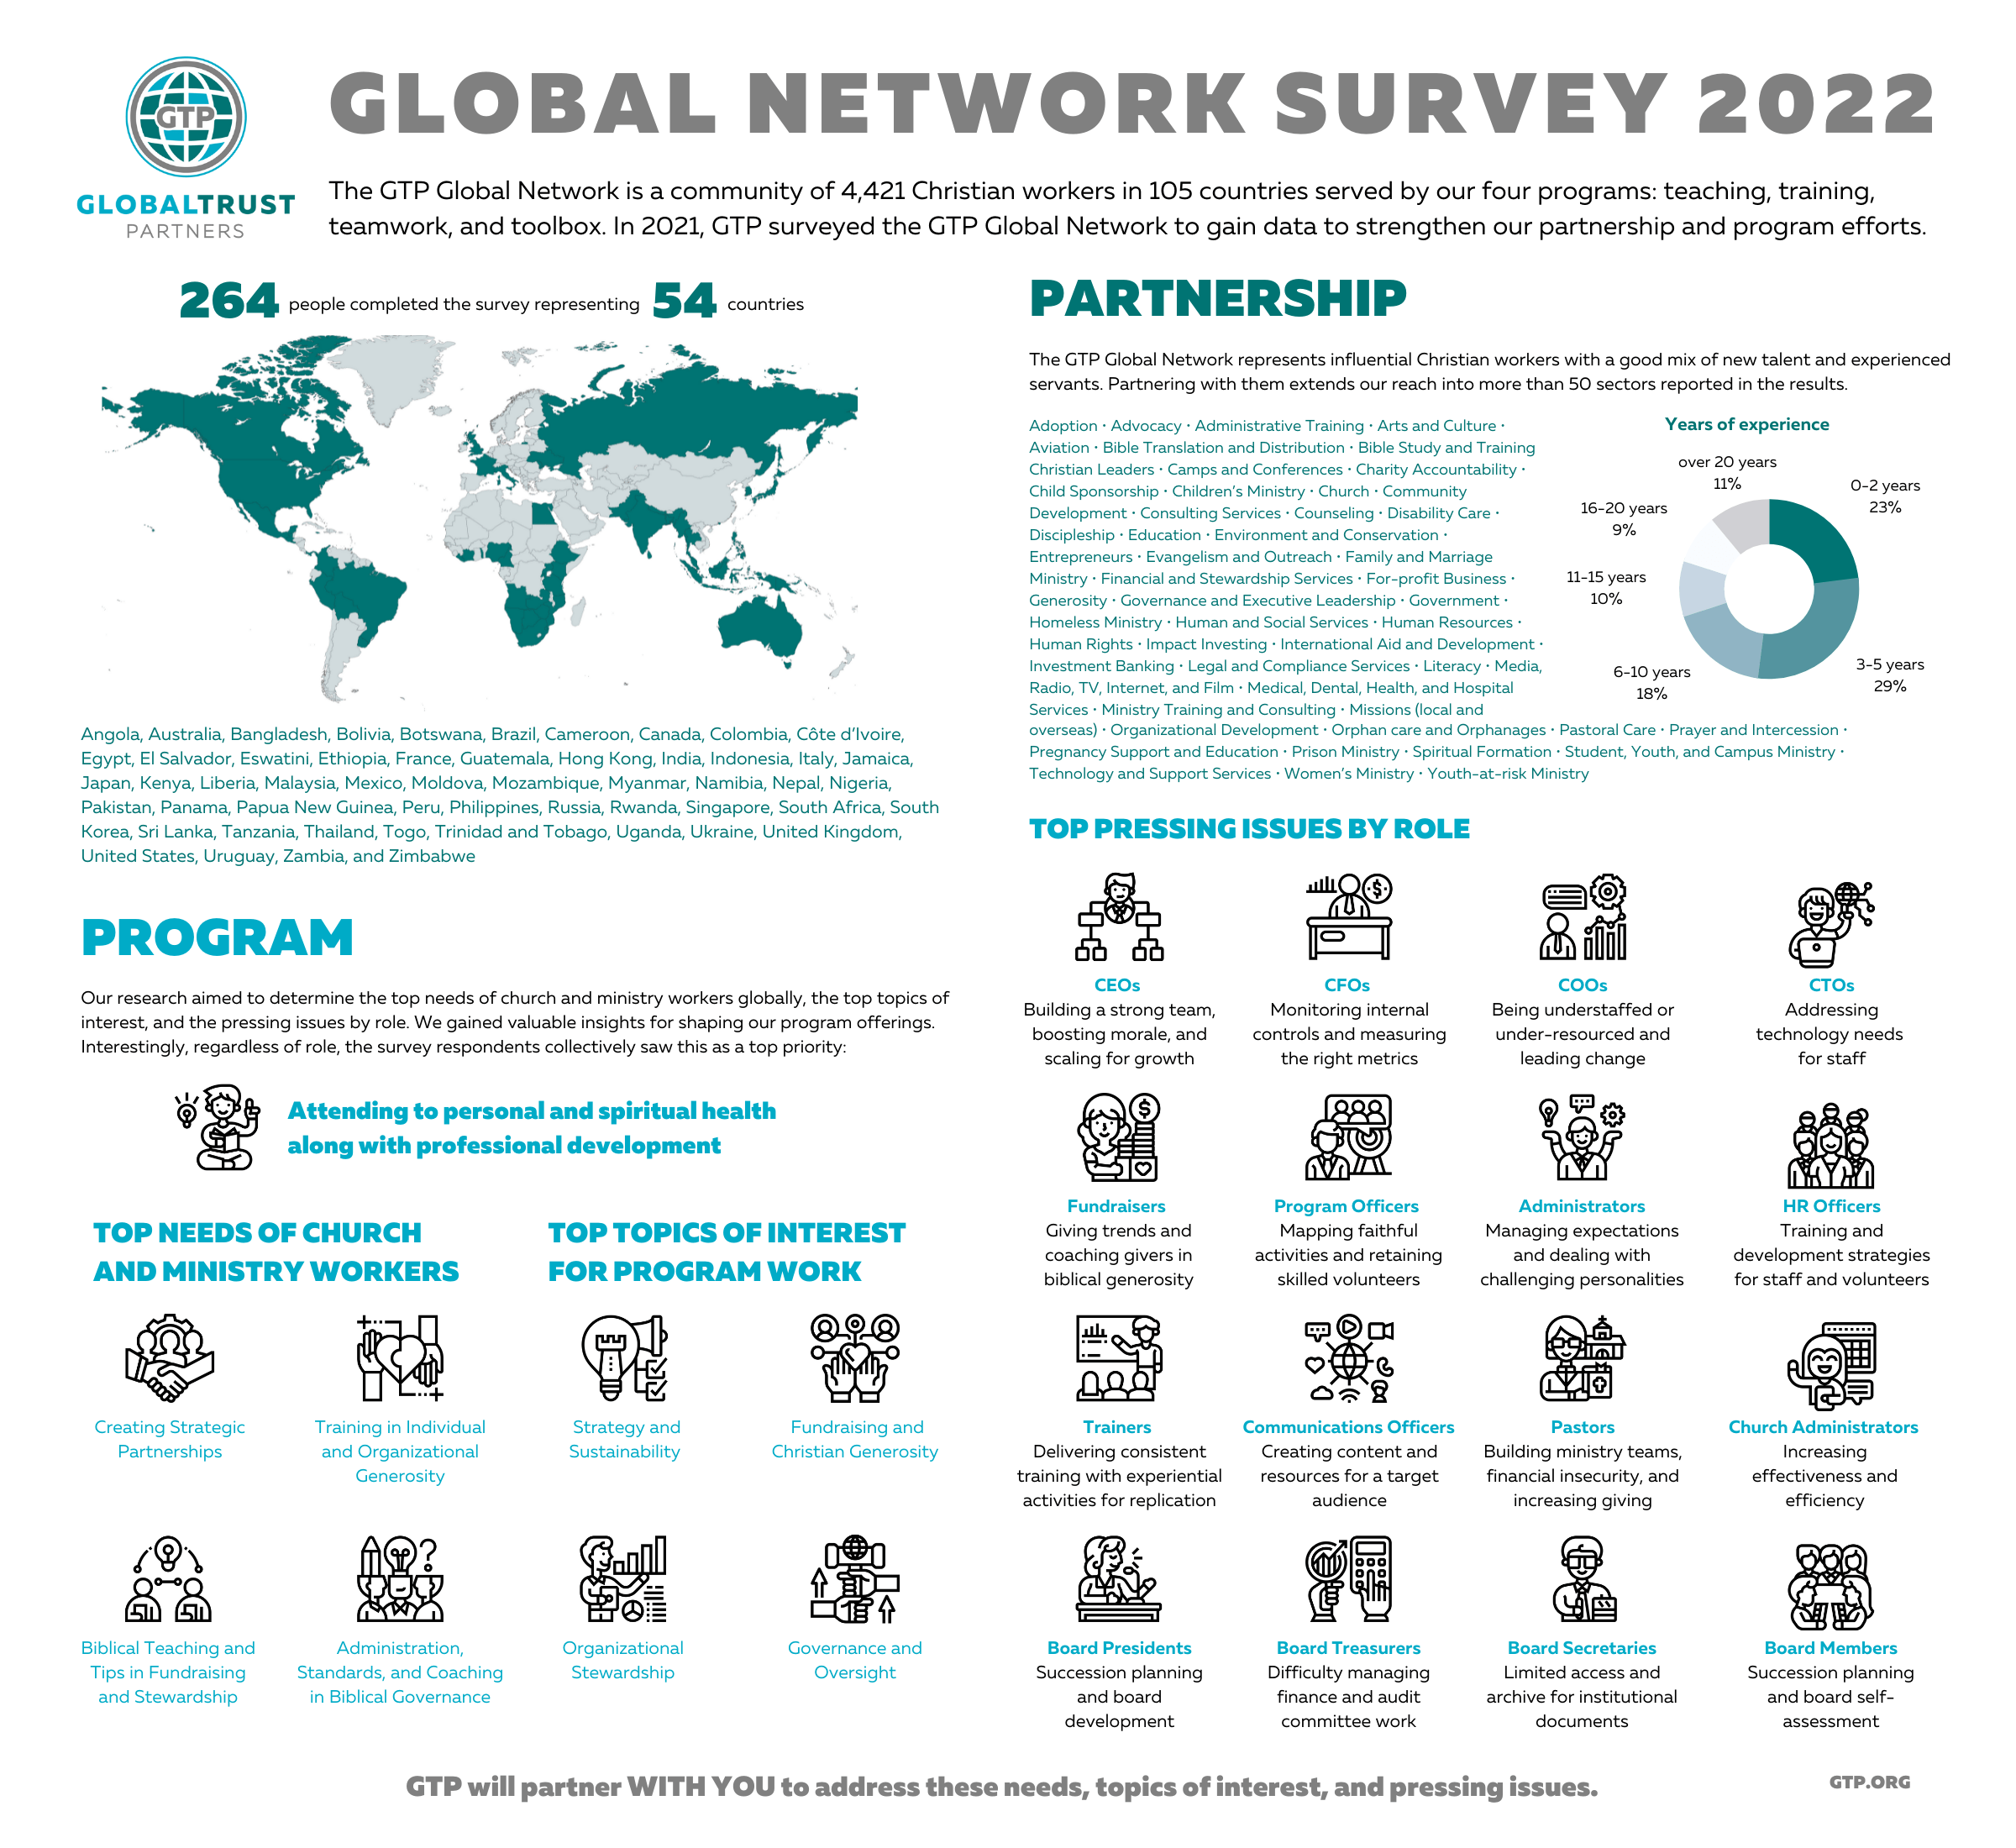 GTP Global Network Survey 2022 Infographic